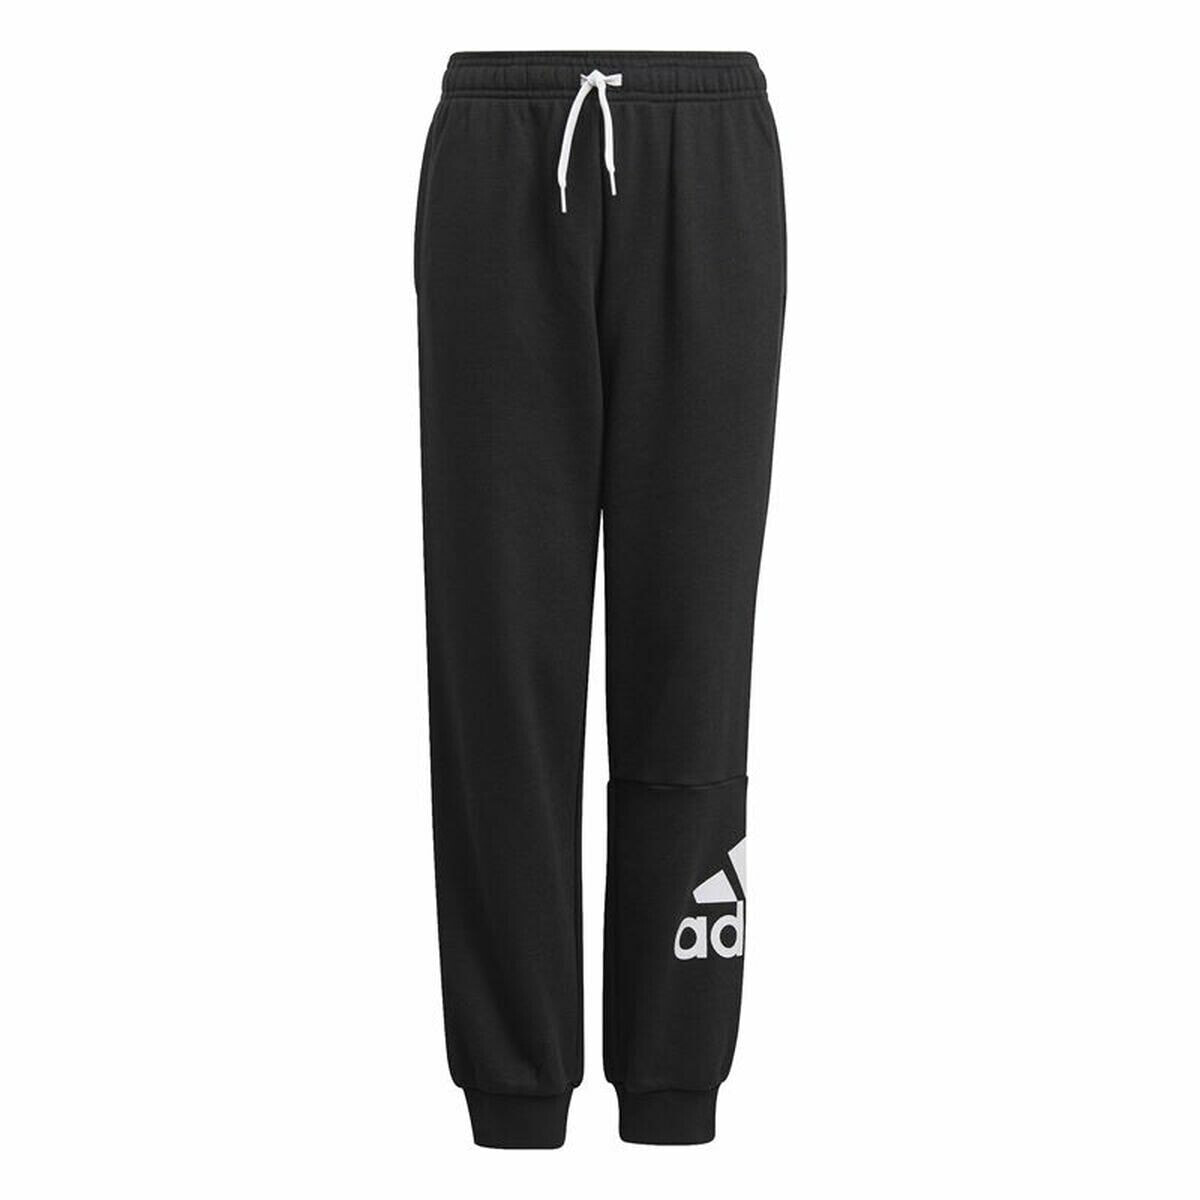 Children's Tracksuit Bottoms Adidas Essentials French Terry Black